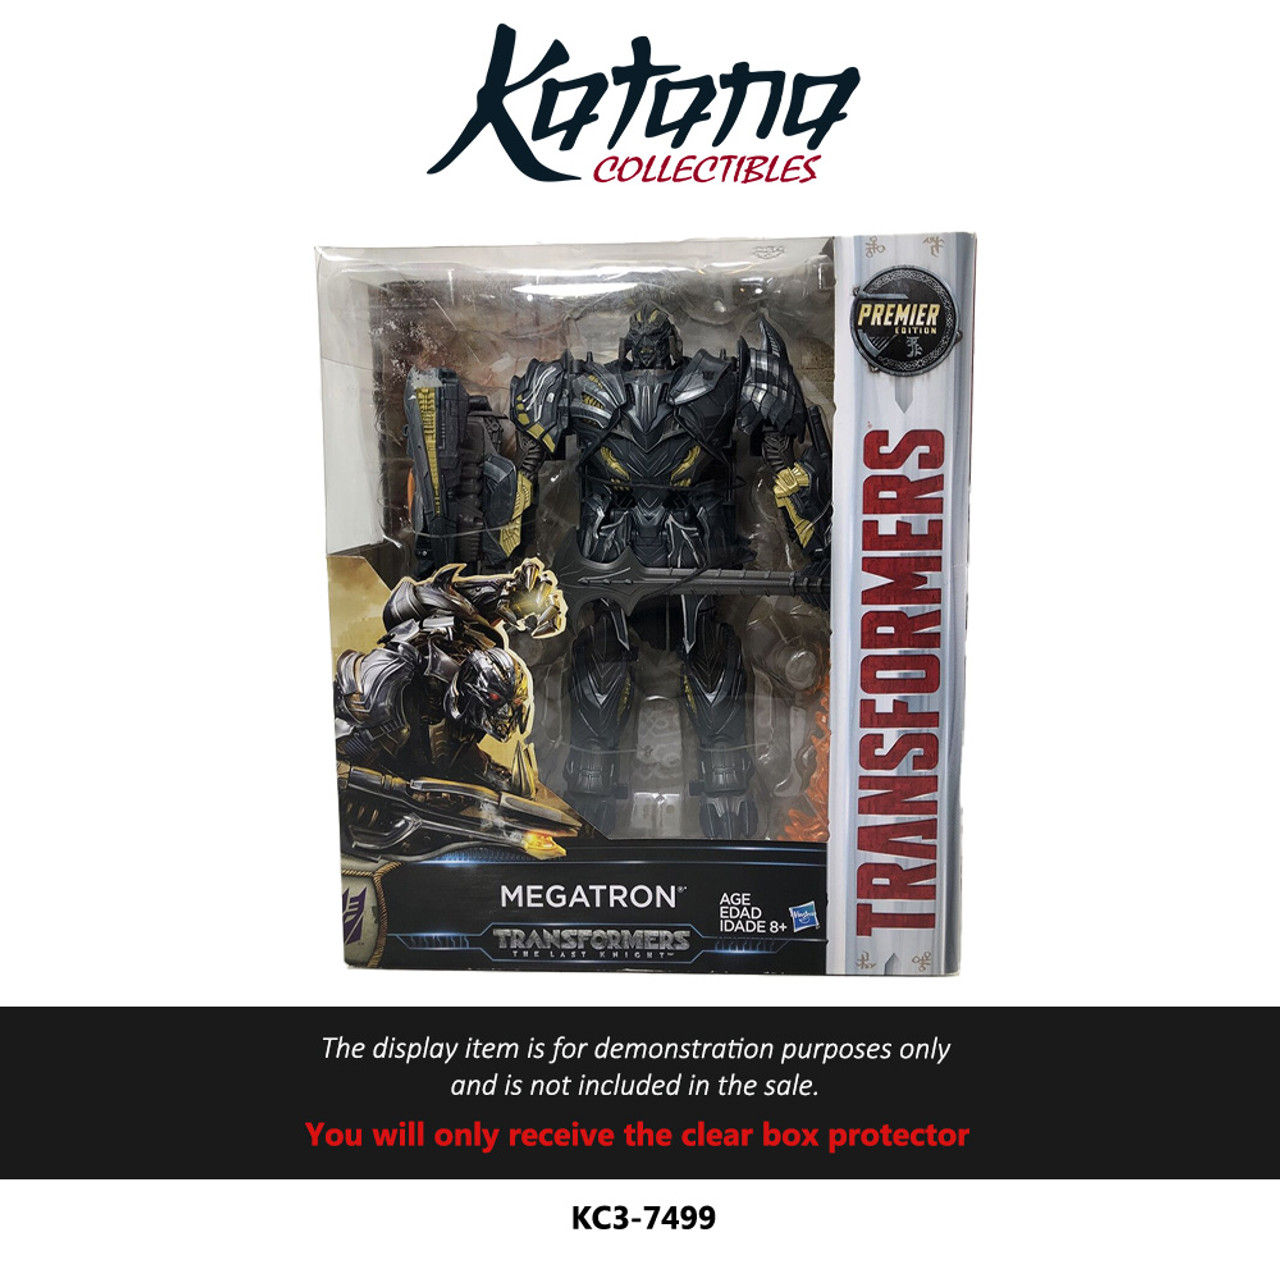 Katana Collectibles Protector For Hasbro Premier Series Transformers Megatron The Last Knight 2016